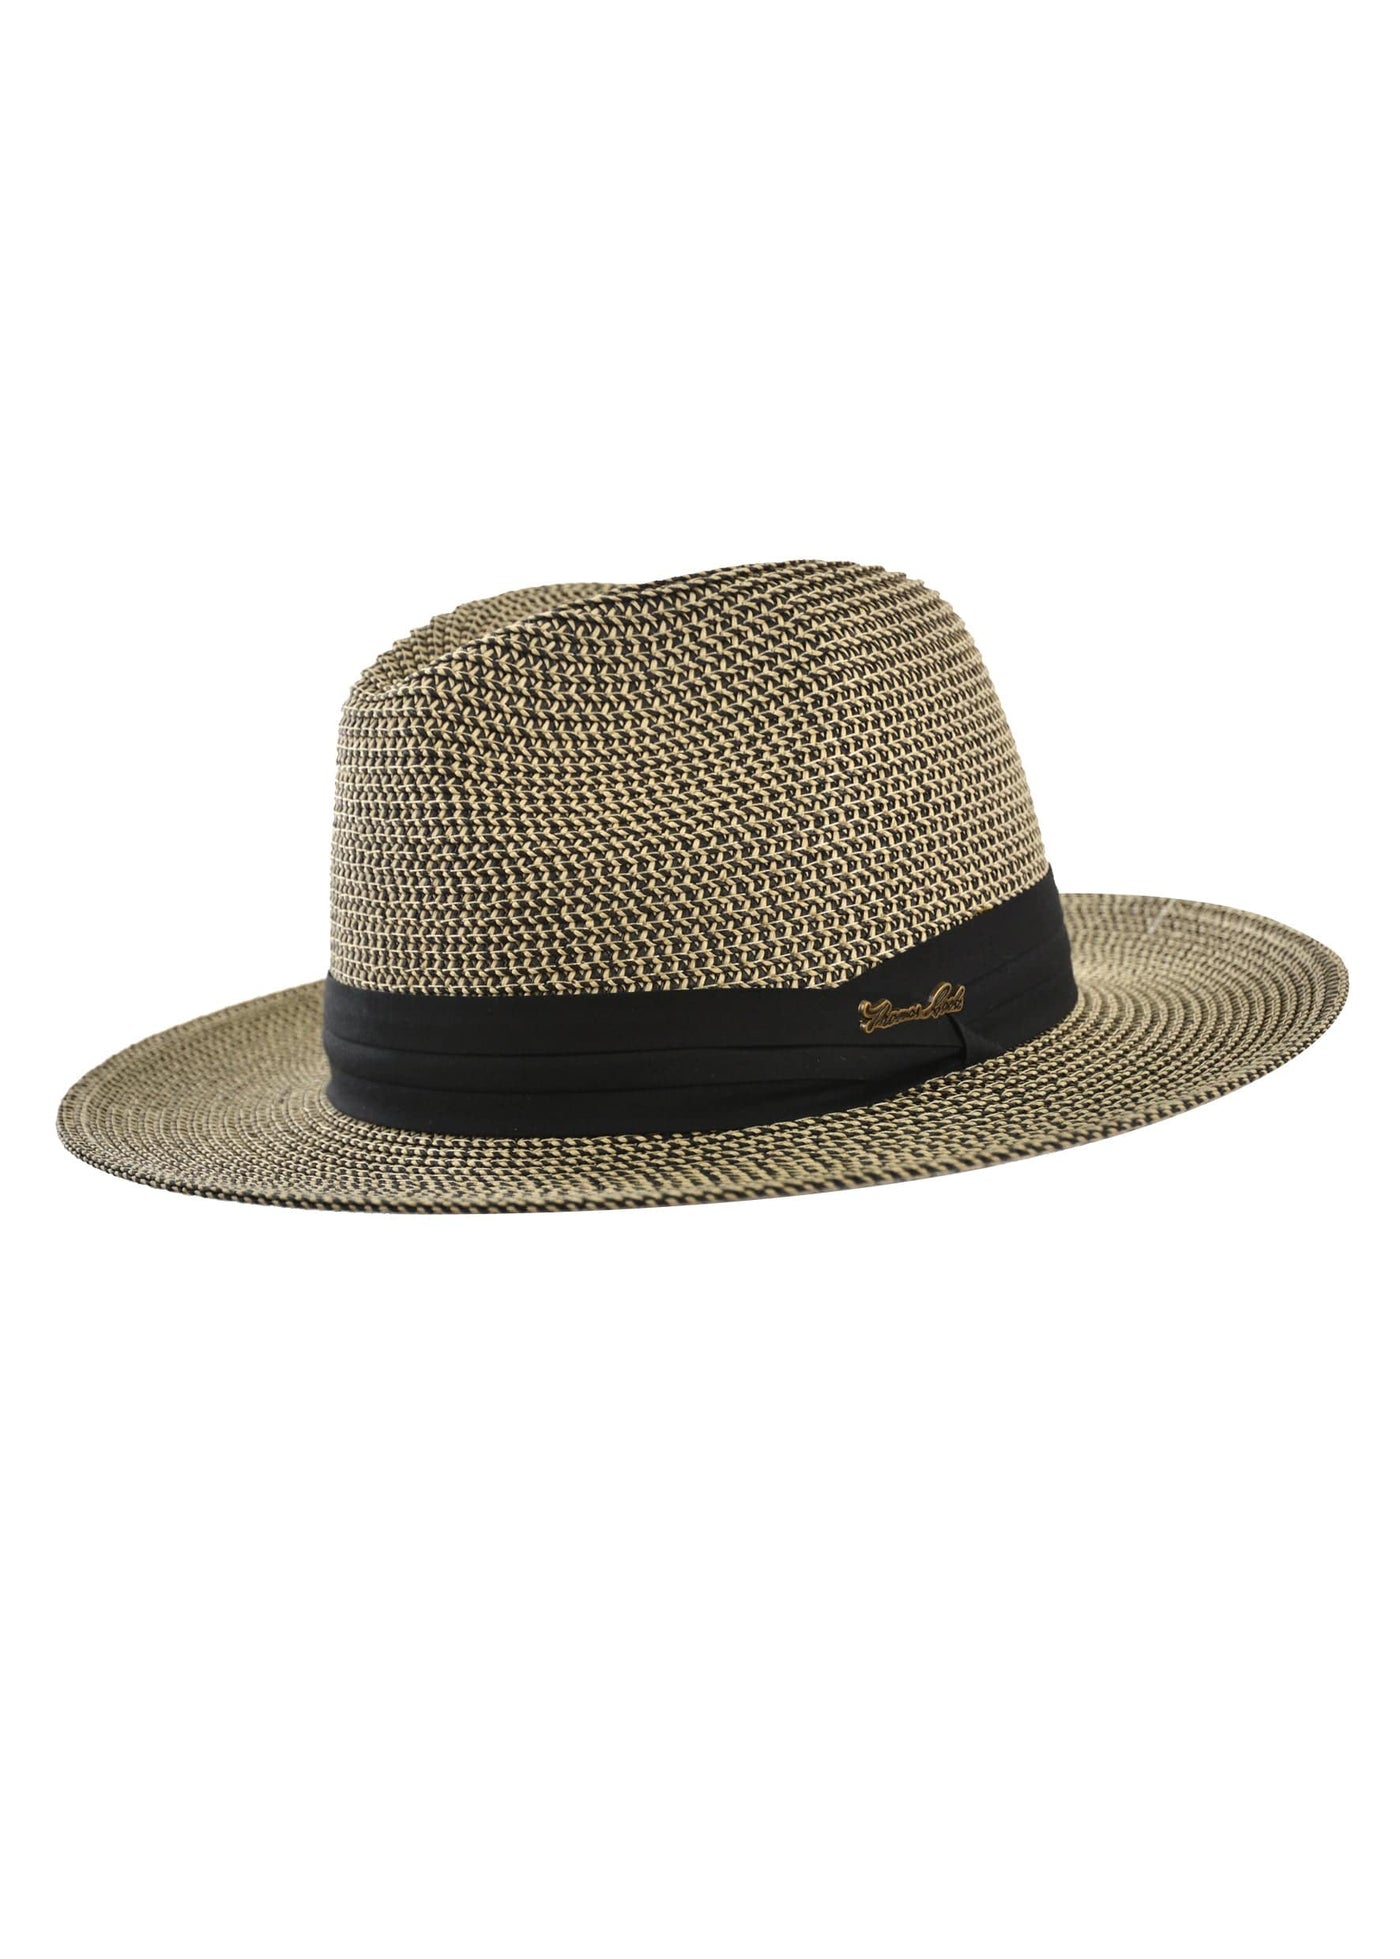 THOMAS COOK BOOTS AND CLOTHING HAT TCP1934HAT Stamford Hat | Black/Natural